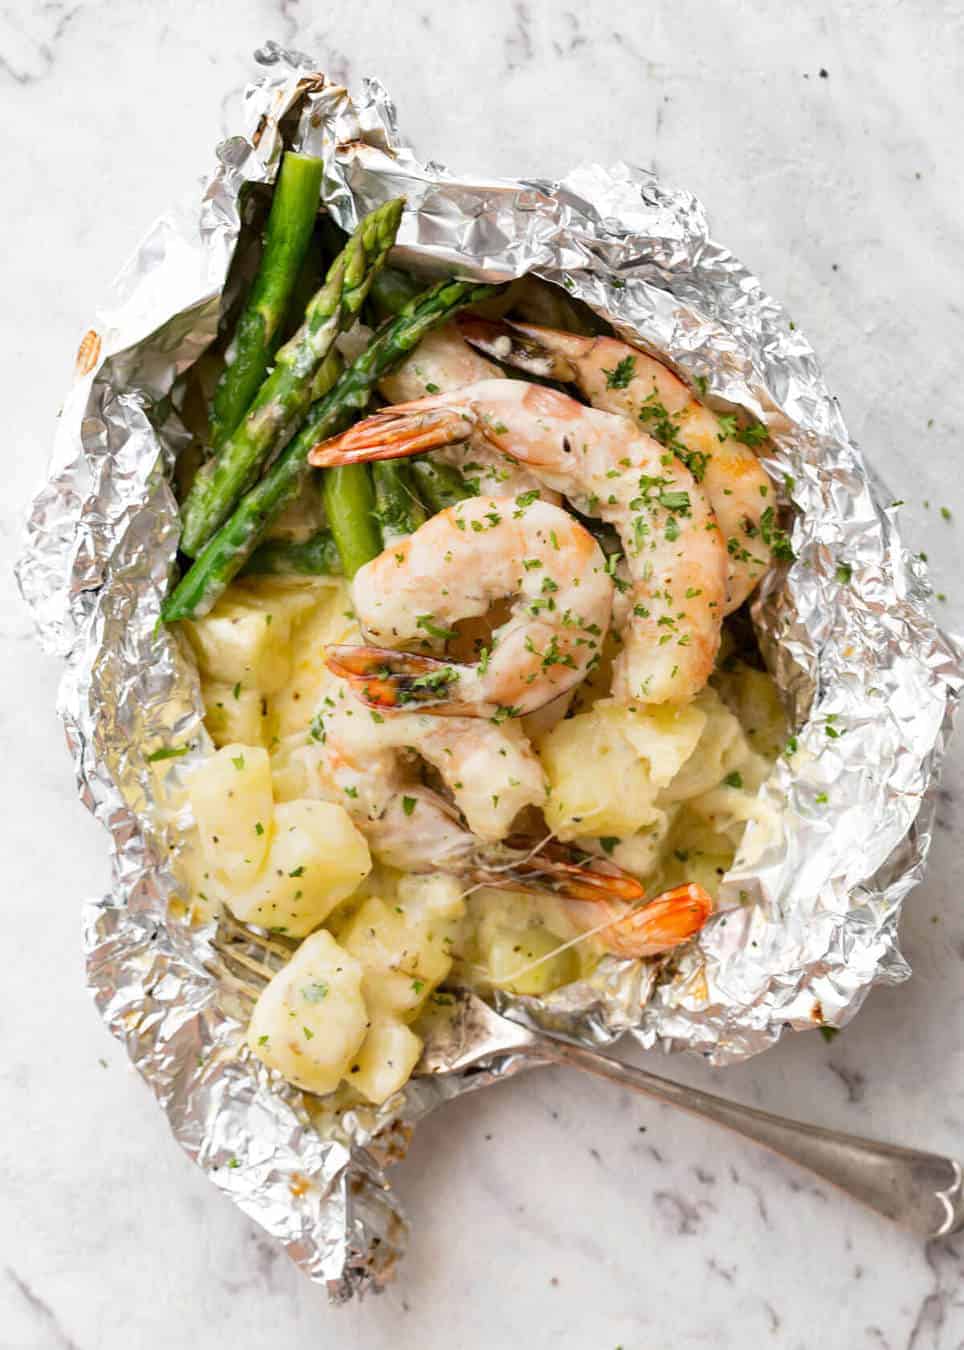 Creamy Garlic Shrimp, Cheesy Potatoes and asparagus - serious contender for the BEST foil packet recipe ever! recipetineats.com